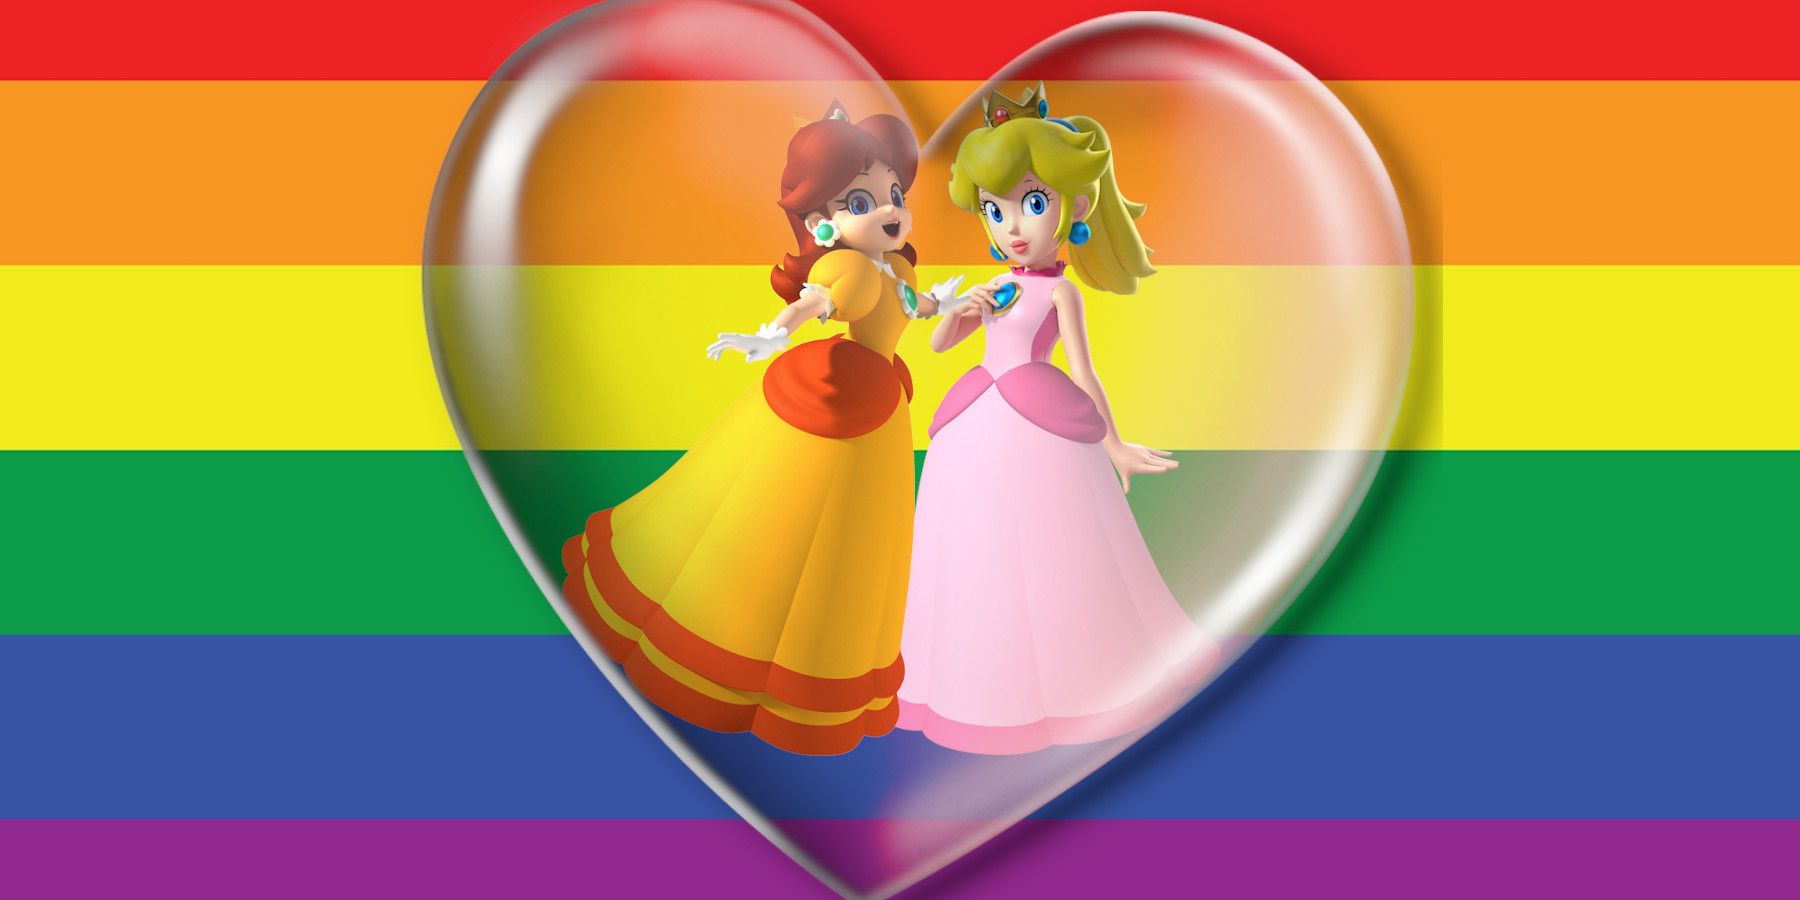 Its Time For Peach And Daisy To Date Already